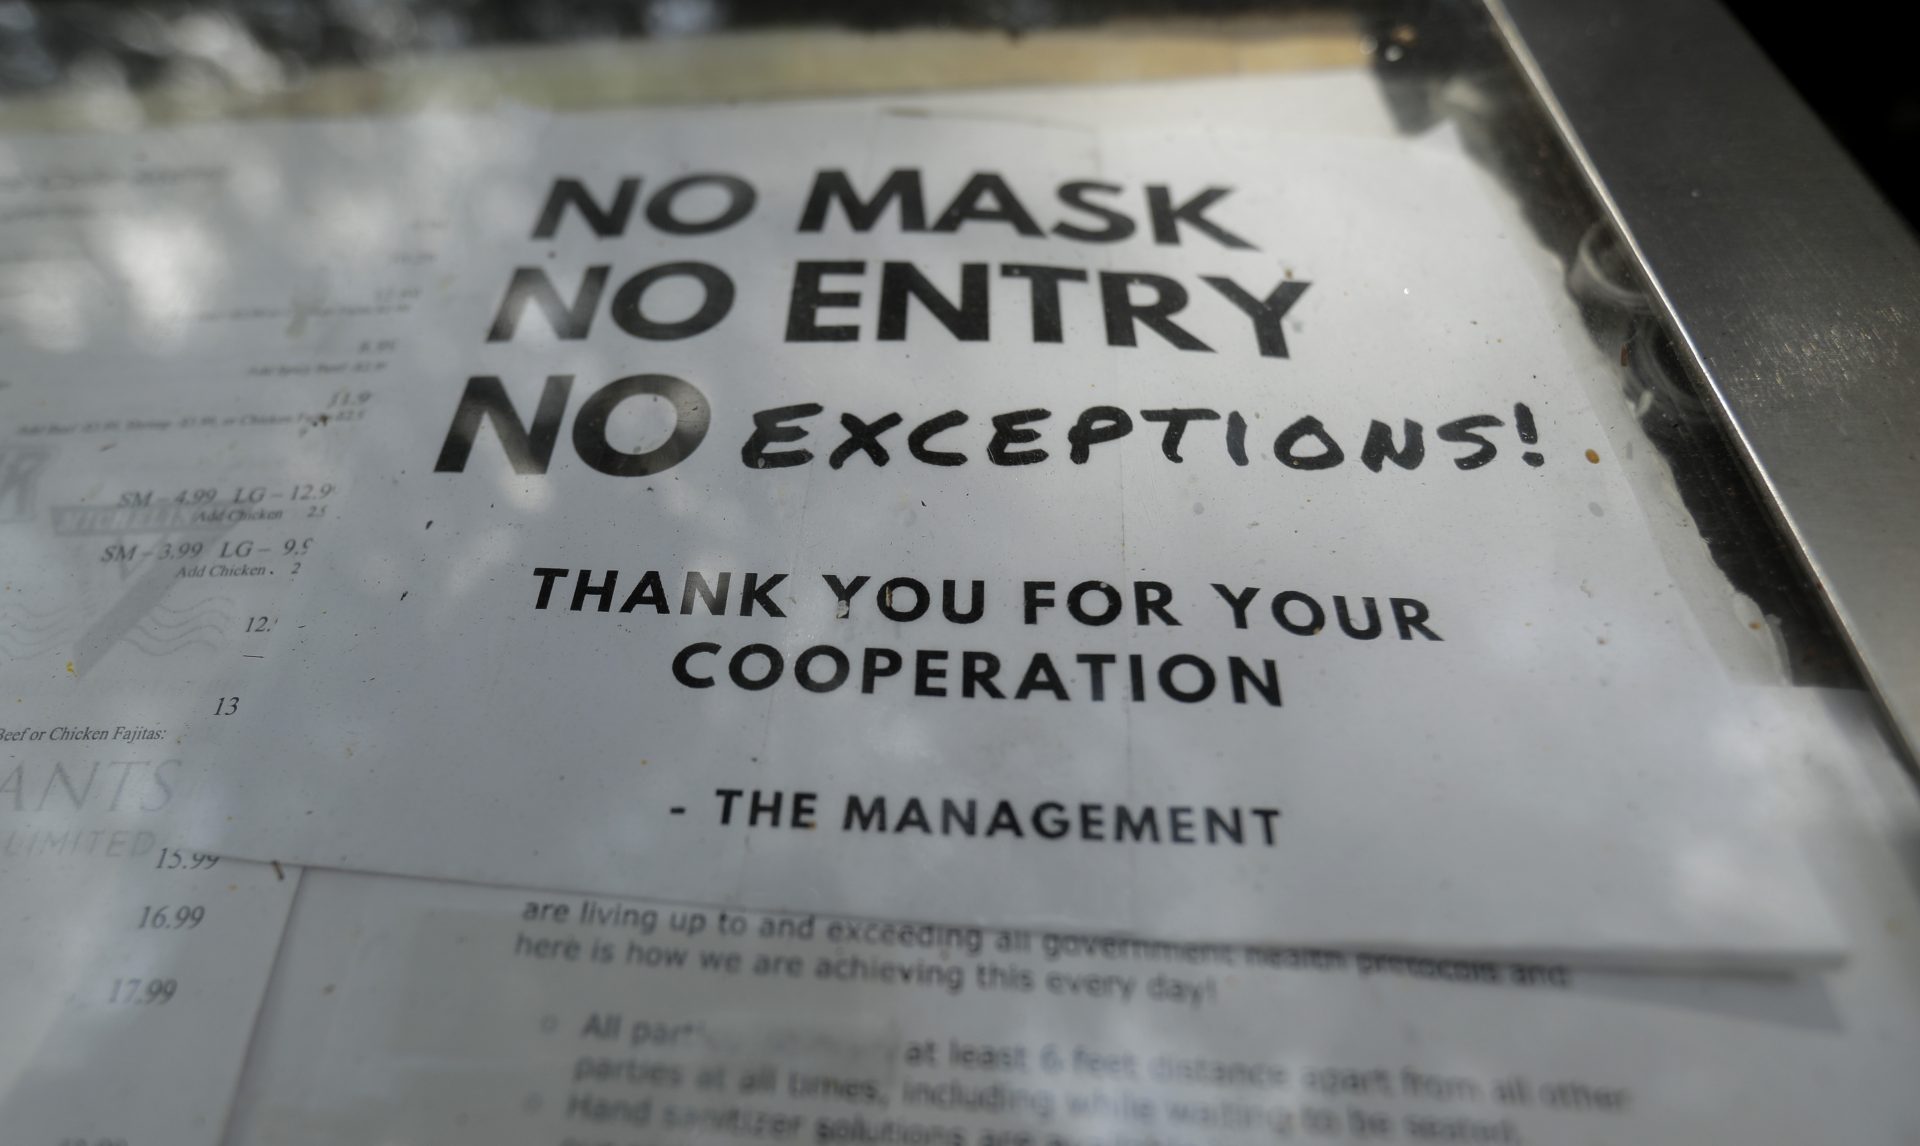 A sign requiring face masks to protect against the spread of COVID-19 is seen at a restaurant, Tuesday, July 7, 2020, in San Antonio. Texas Gov. Greg Abbott has declared masks or face coverings must be worn in public across most of the state as local officials across the state say their hospitals are becoming increasingly stretched and are in danger of becoming overrun as cases of the coronavirus surge.